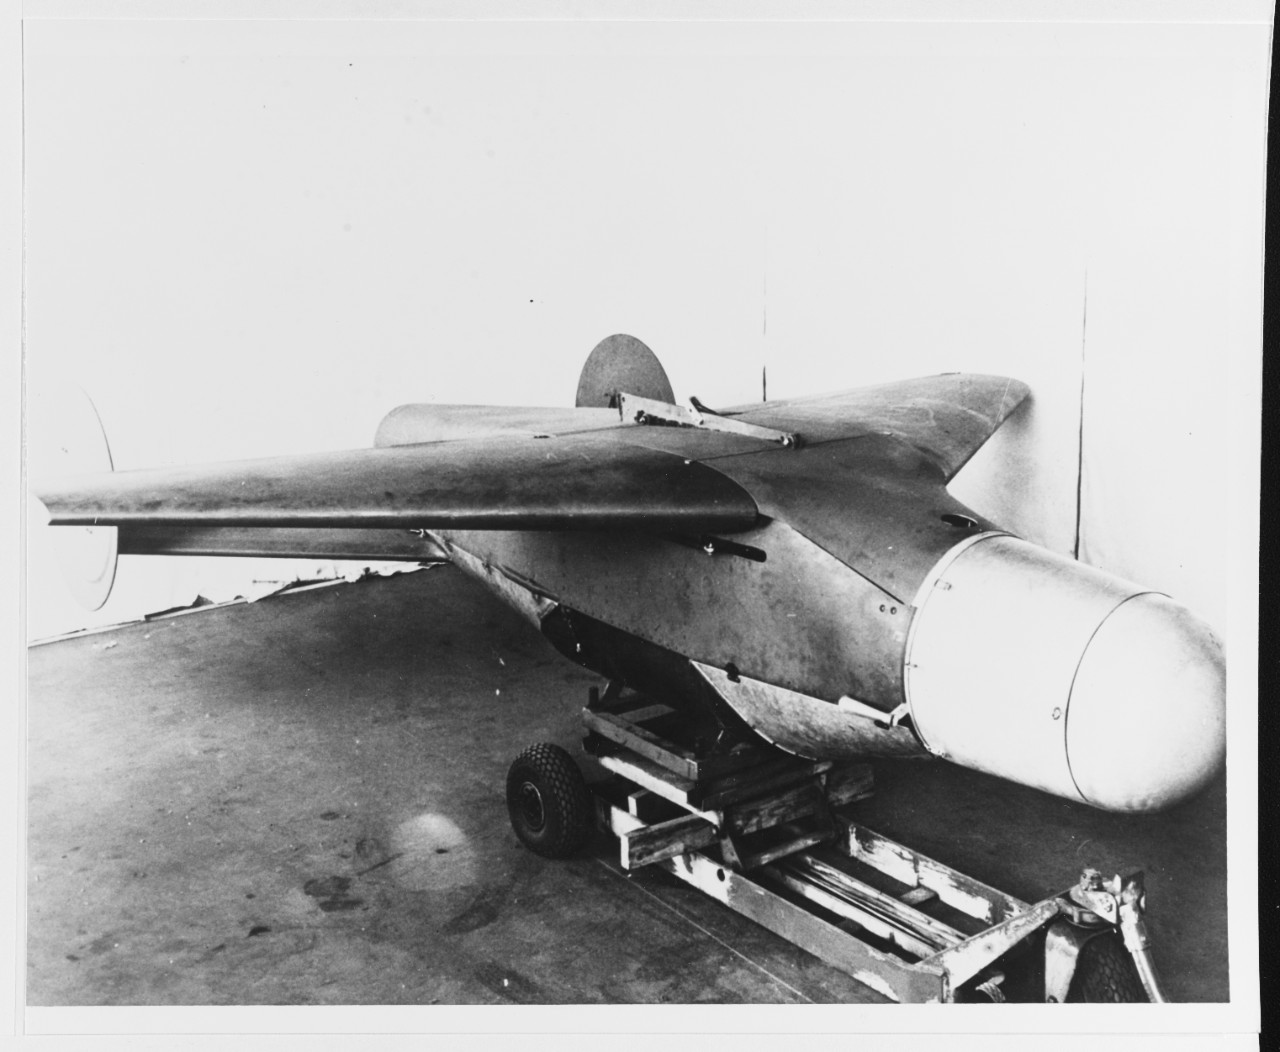 "Bat" air-to-surface guided missile